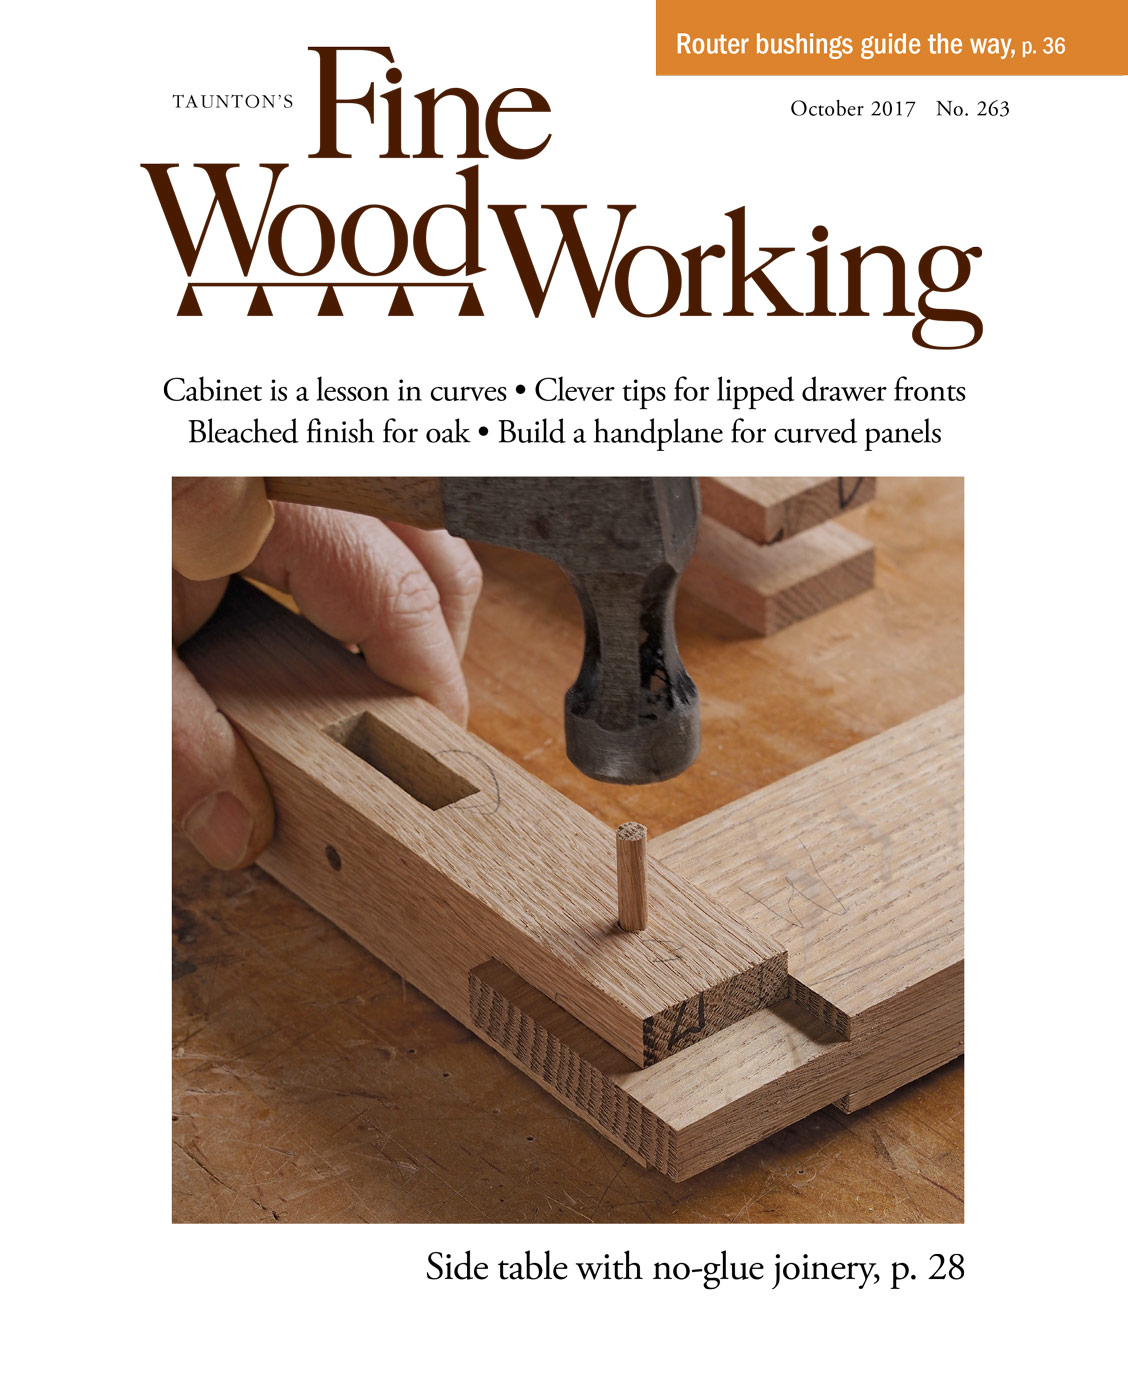 Greenwood: Carving a wooden cup - FineWoodworking